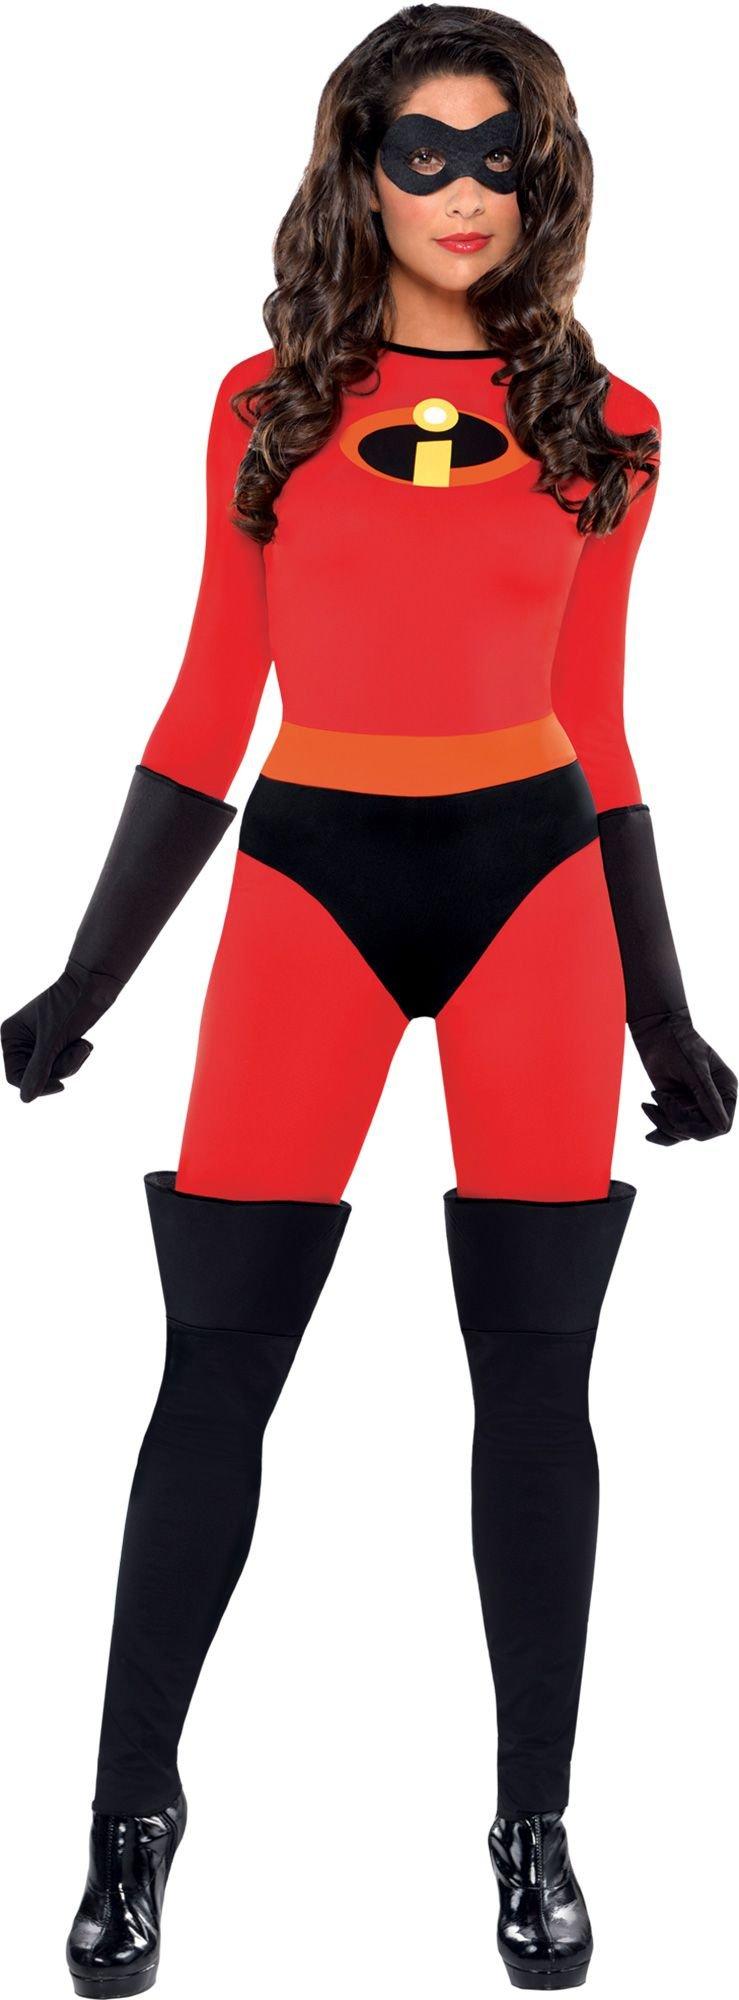 Adult Mrs. Incredible Deluxe Costume - The Incredibles | Party City